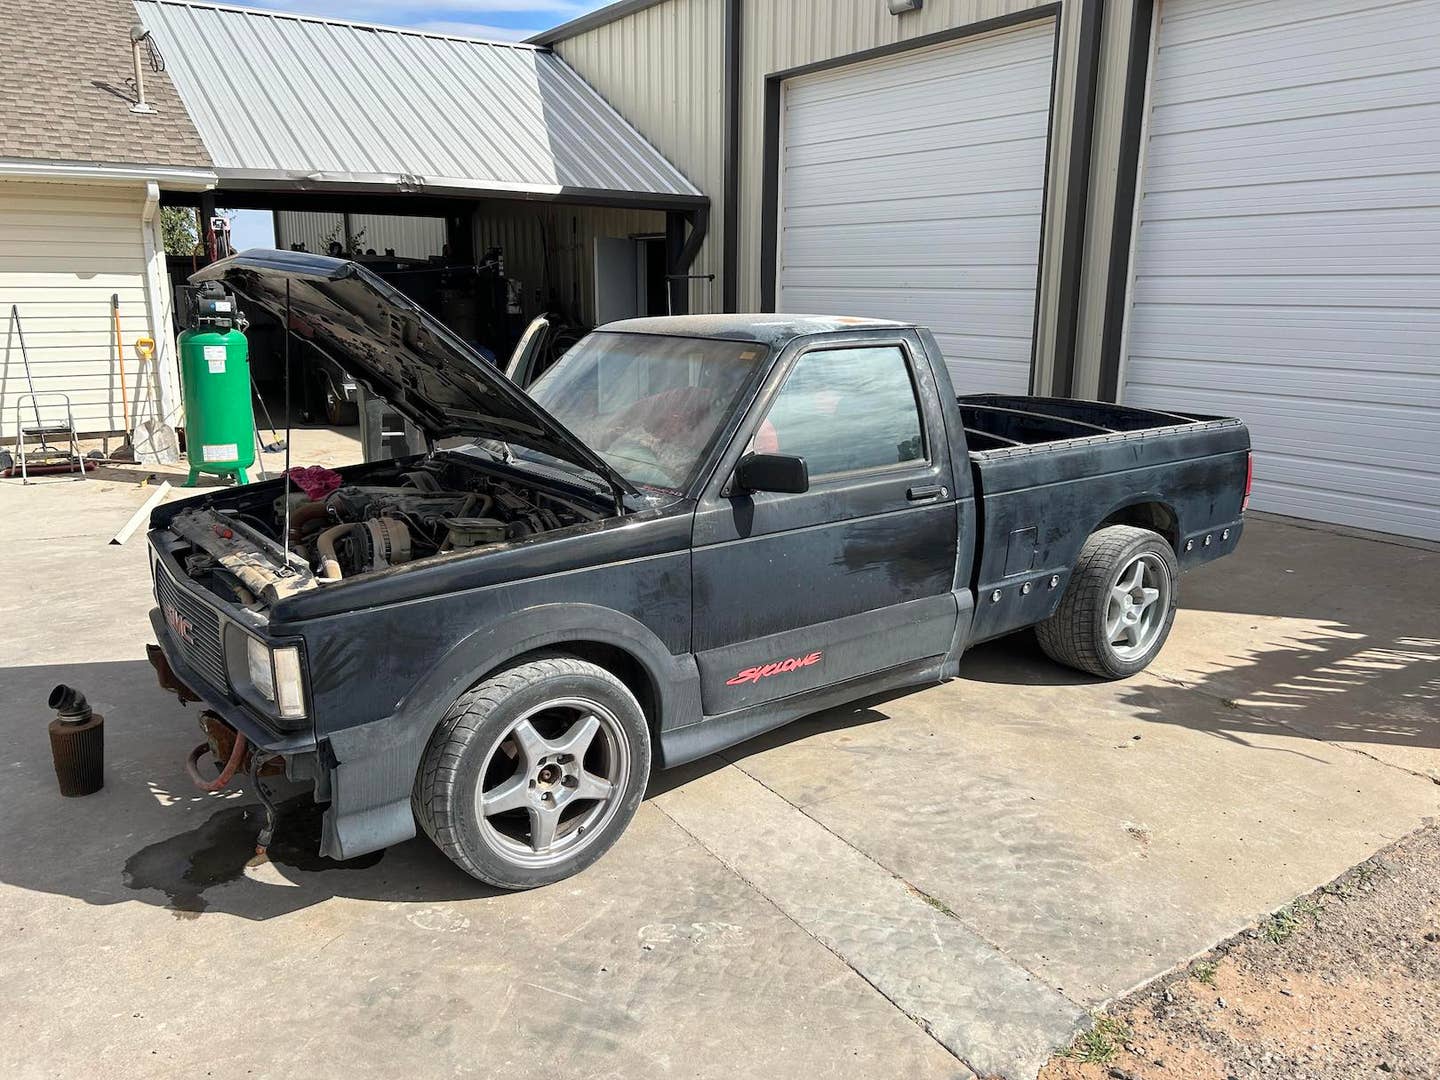 GMC Syclone with its hood open